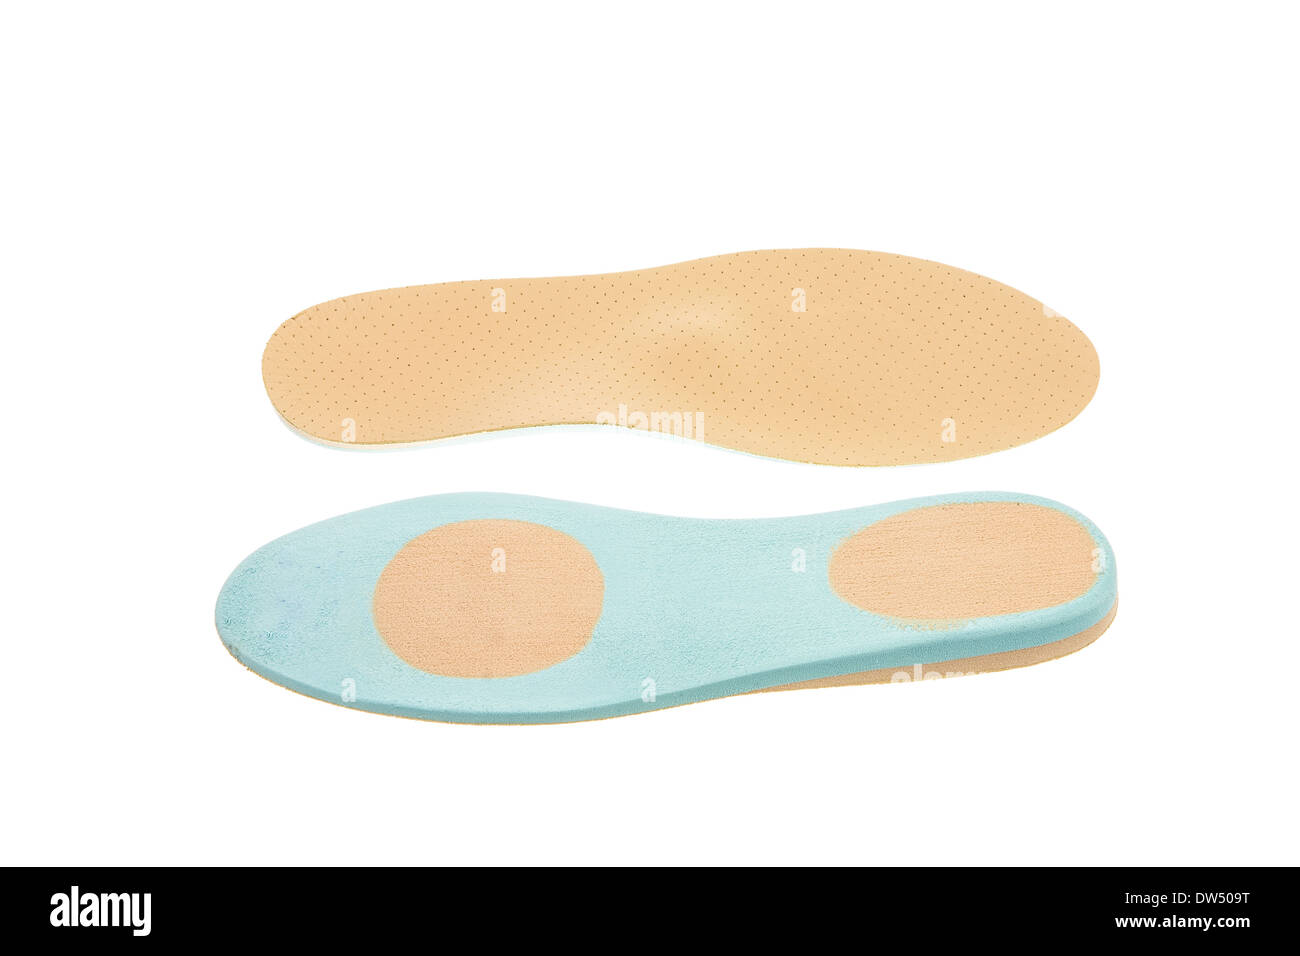 Closeup of a pair of orthopedic shoe insoles Stock Photo